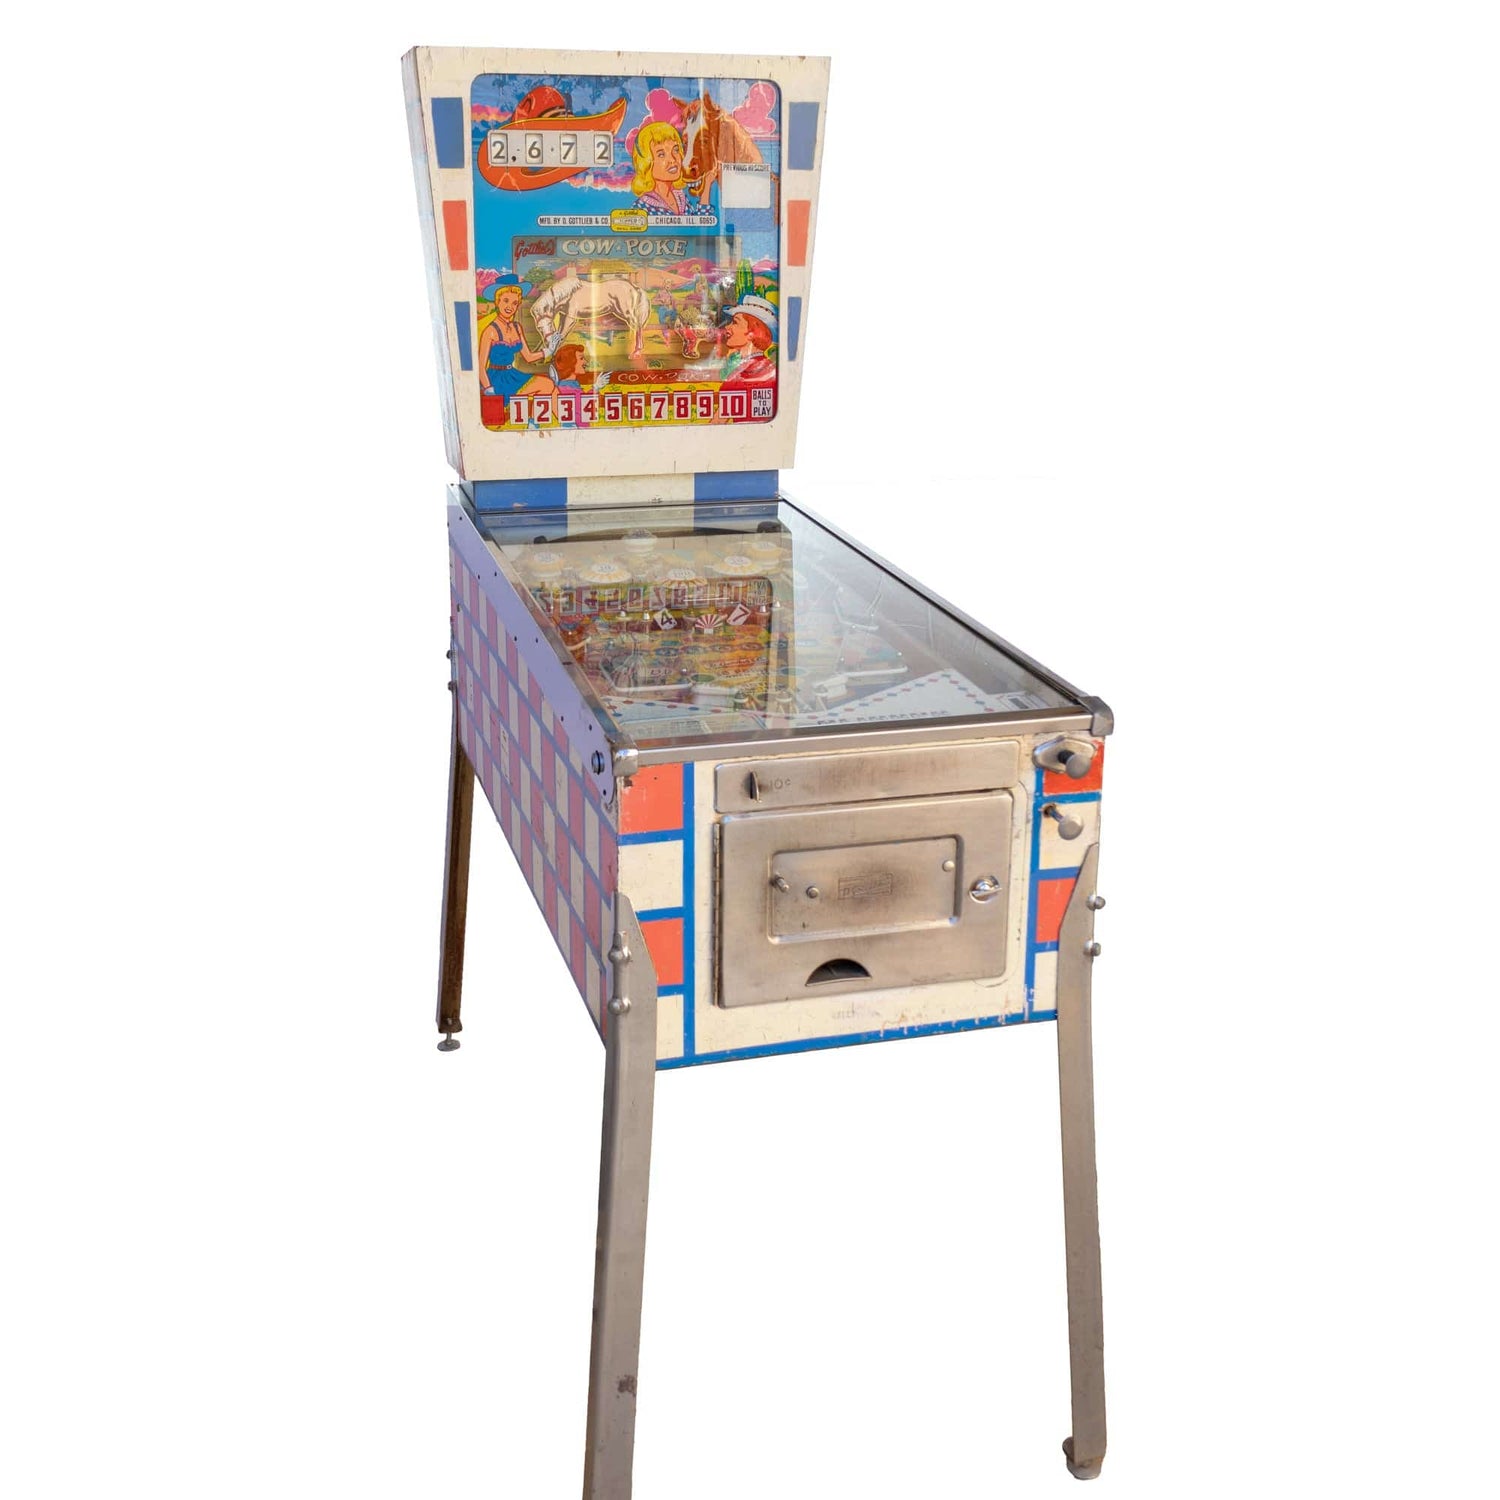 1960s Cow Poke Pinball Machine Side Front View